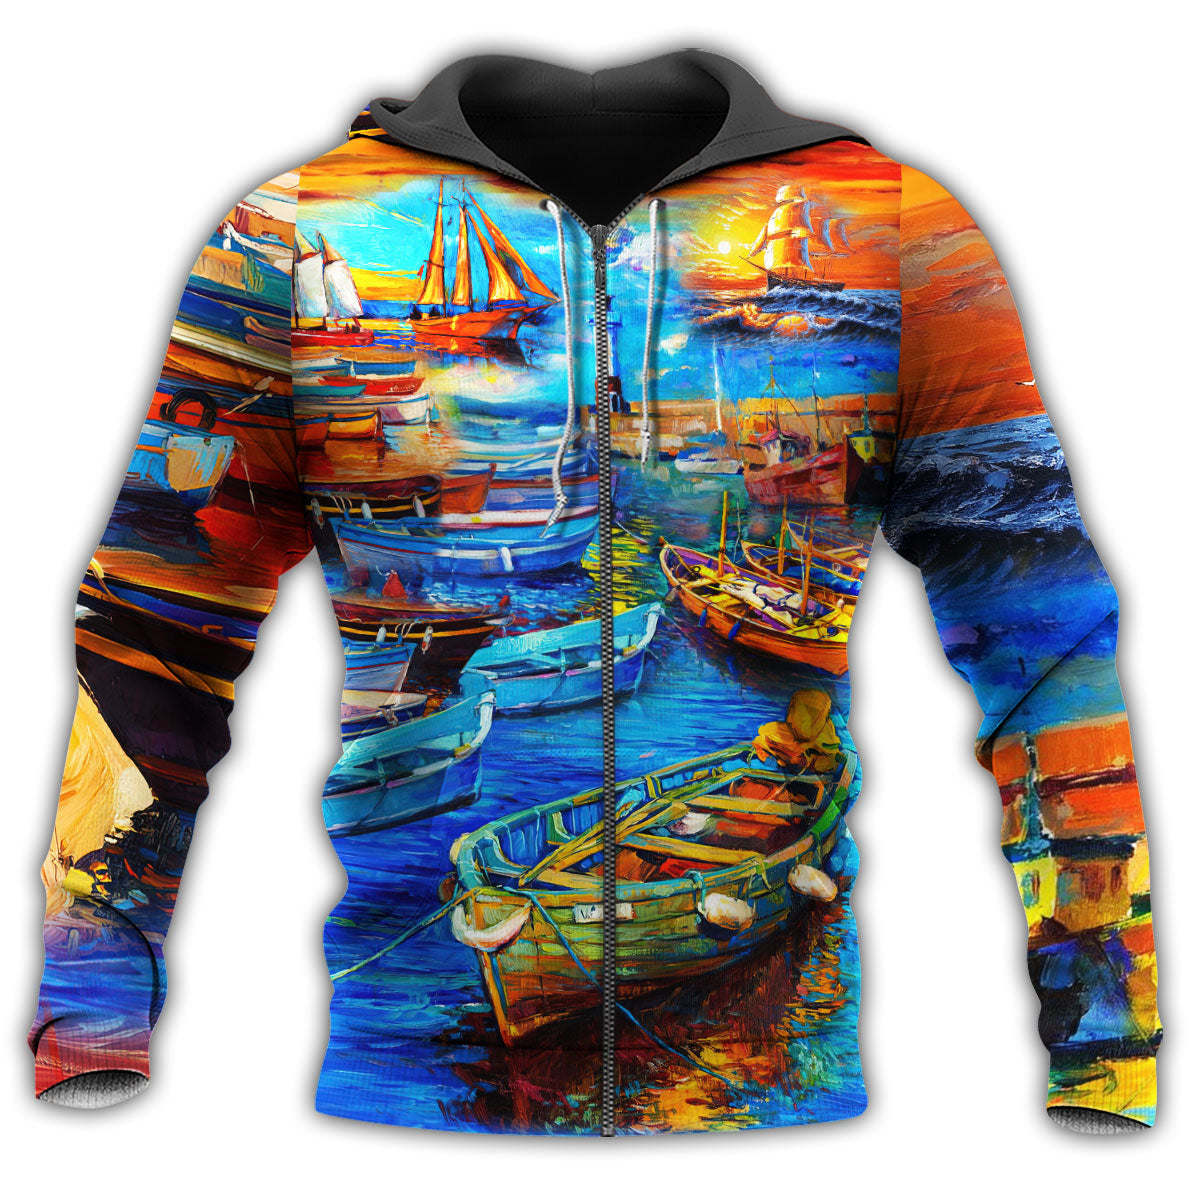 Zip Hoodie / S Boat The Bygone Days By The Harbor In The Sunset - Hoodie - Owls Matrix LTD